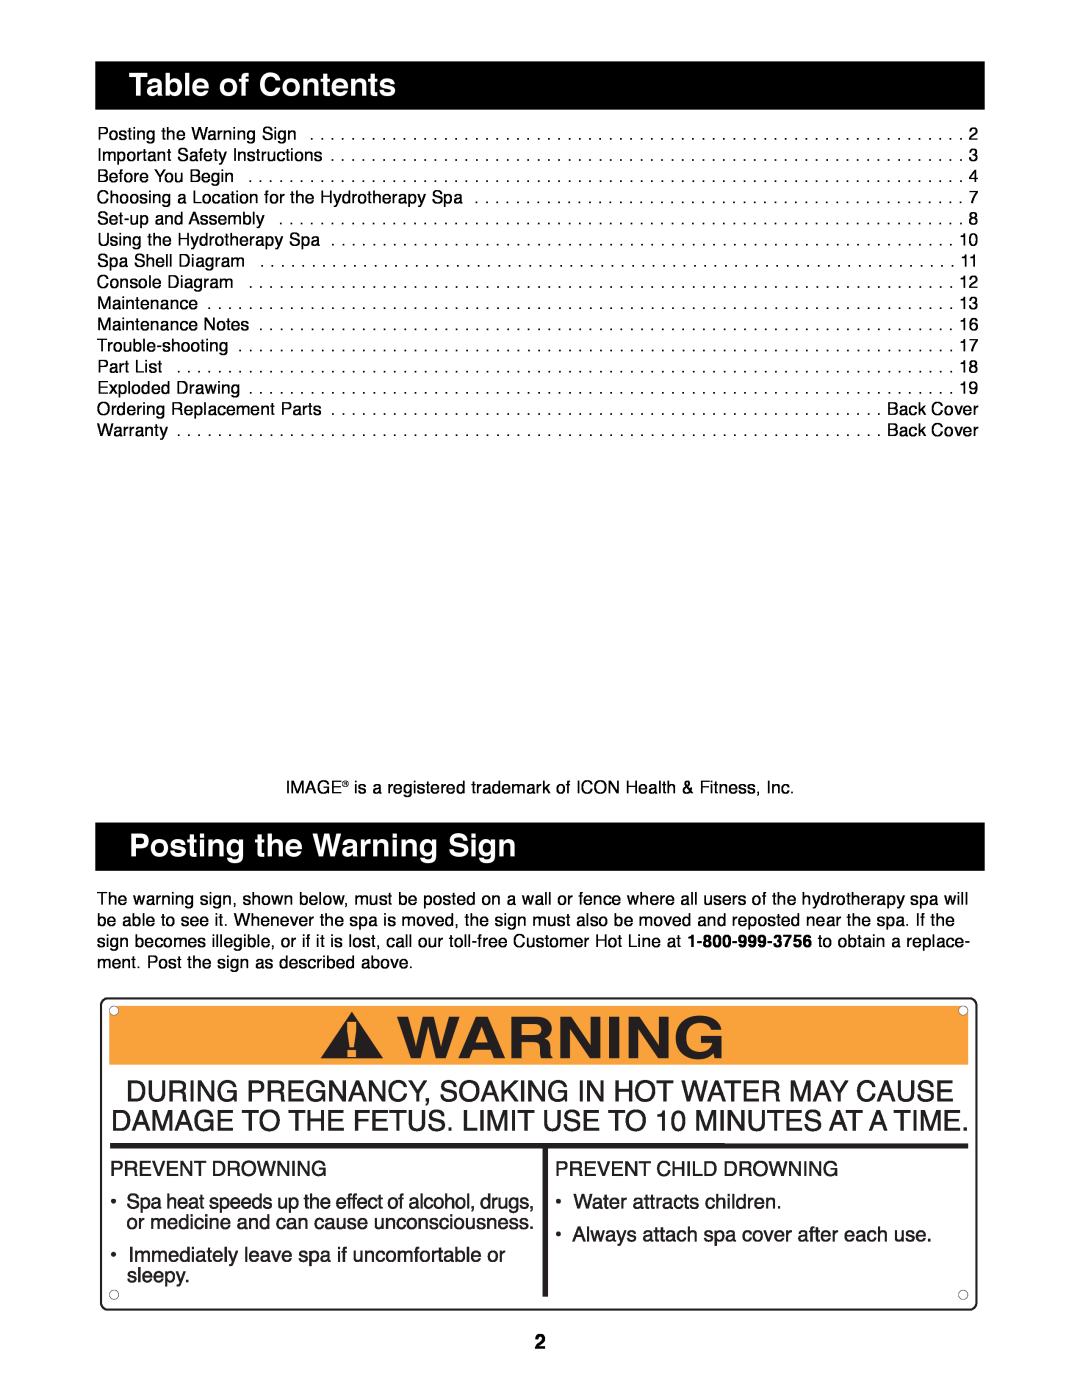 Image IMHS40090 Table of Contents, Posting the Warning Sign, Important Safety Instructions, Before You Begin, Maintenance 